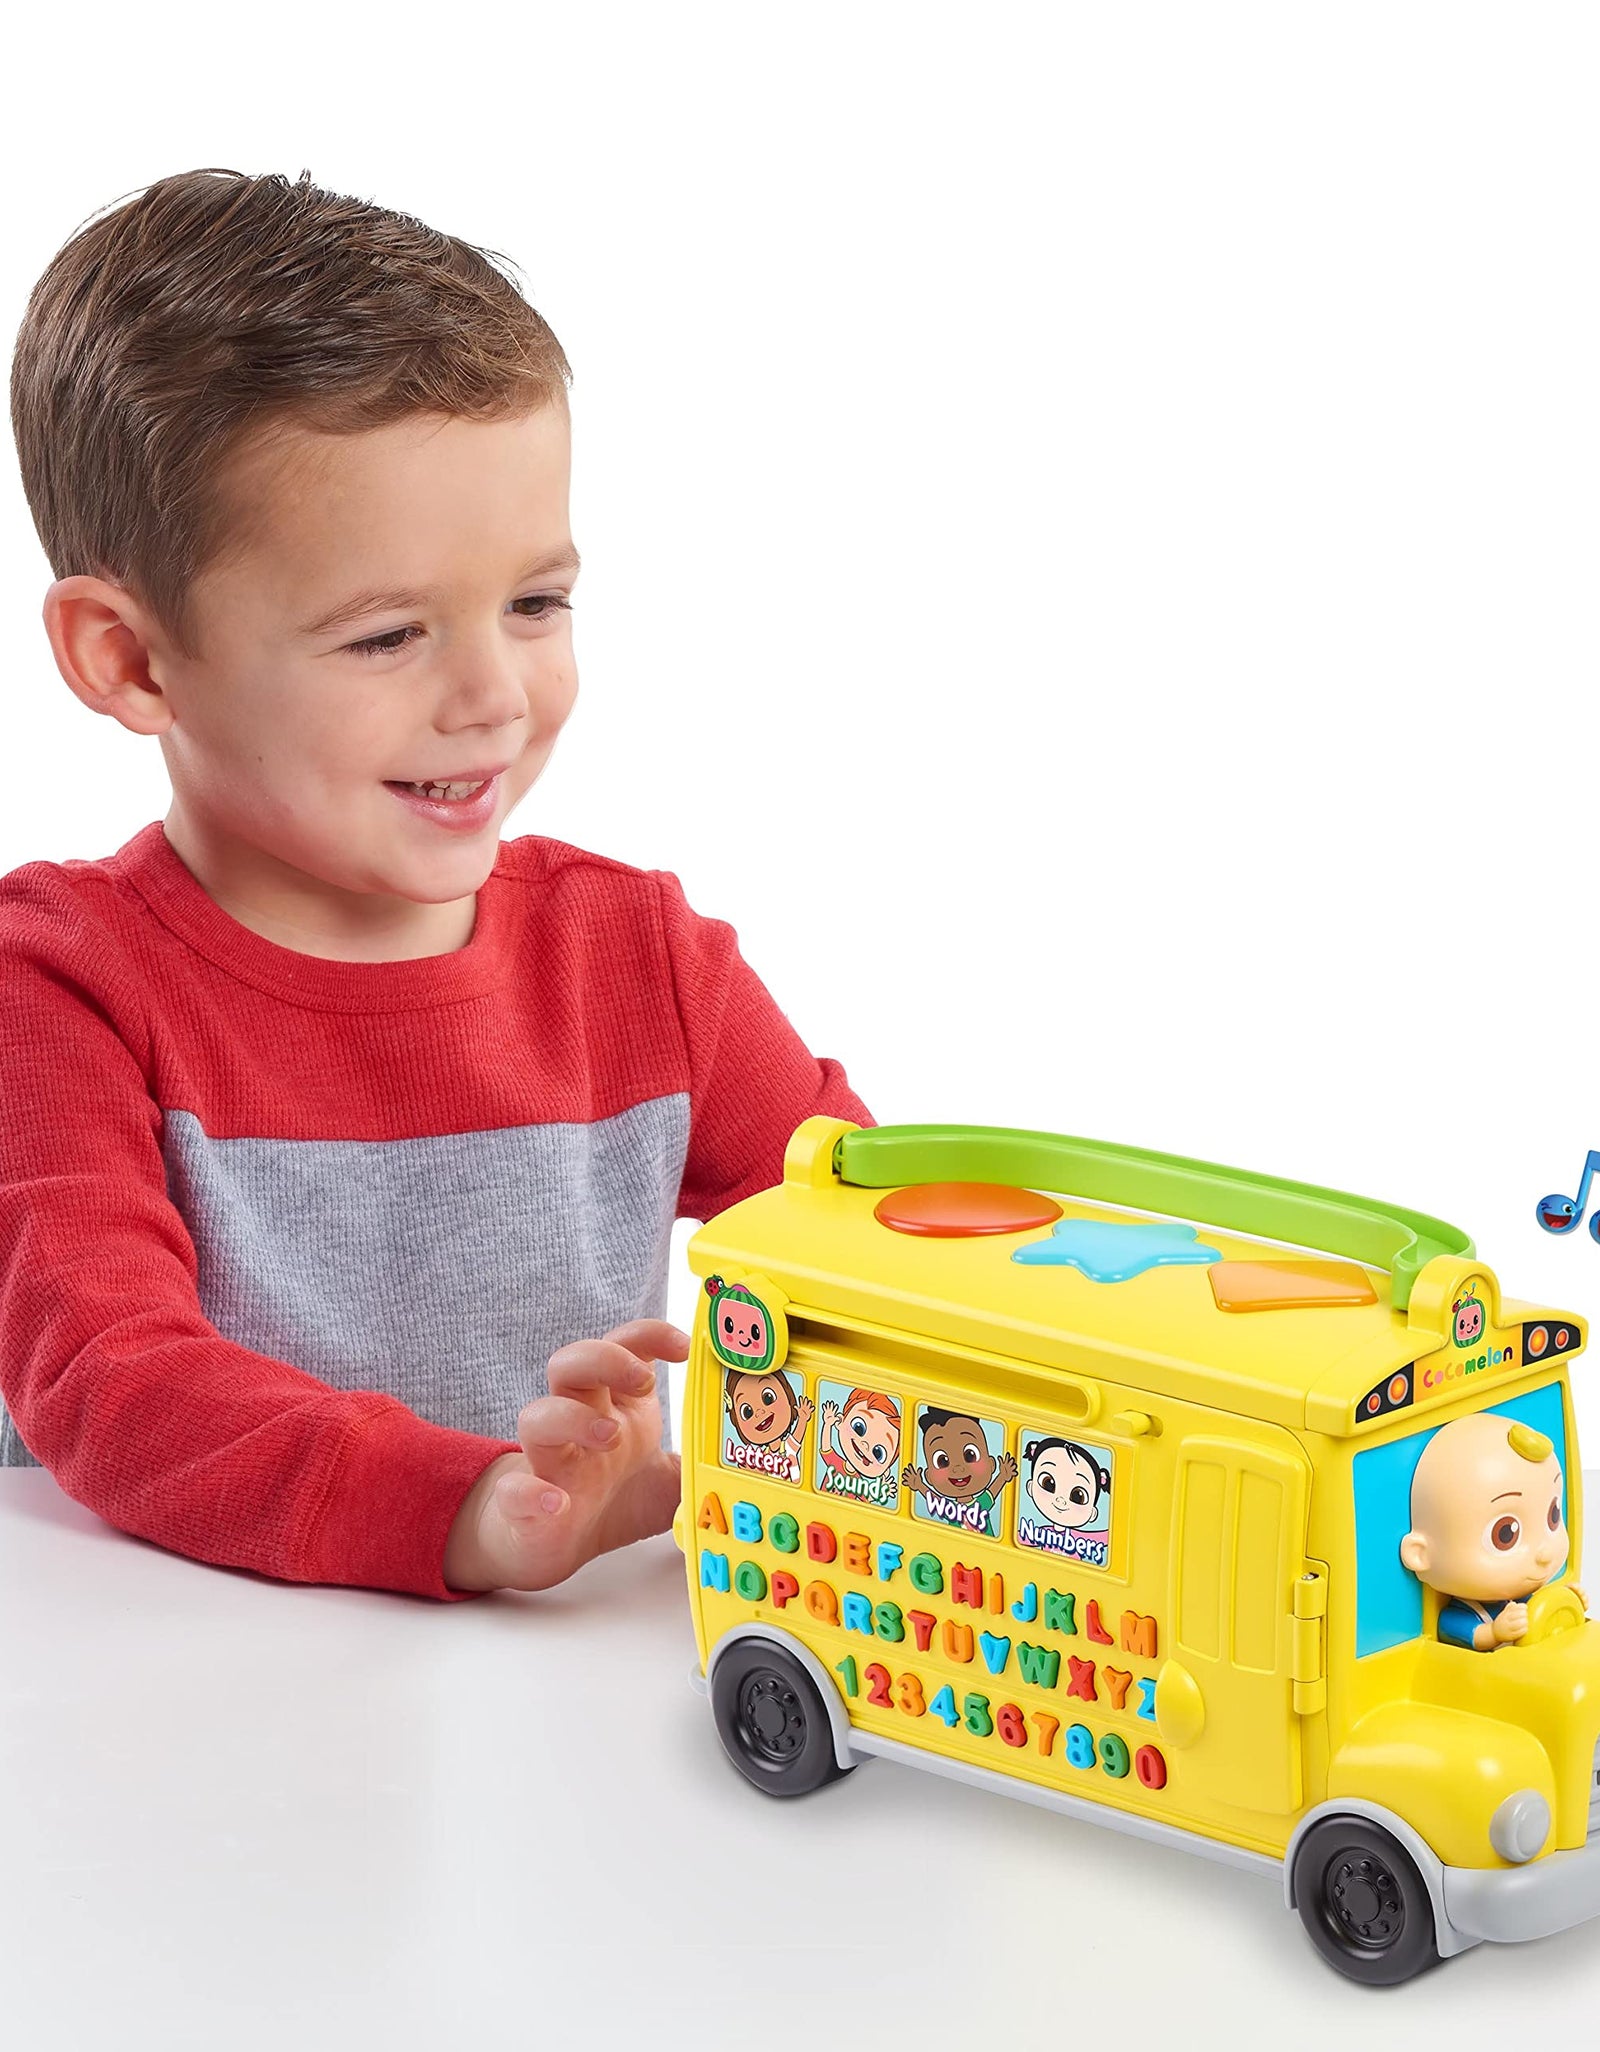 CoComelon Musical Learning Bus, Number and Letter Recognition, Phonetics, Yellow School Bus Toy Plays ABCs and Wheels on the Bus, by Just Play